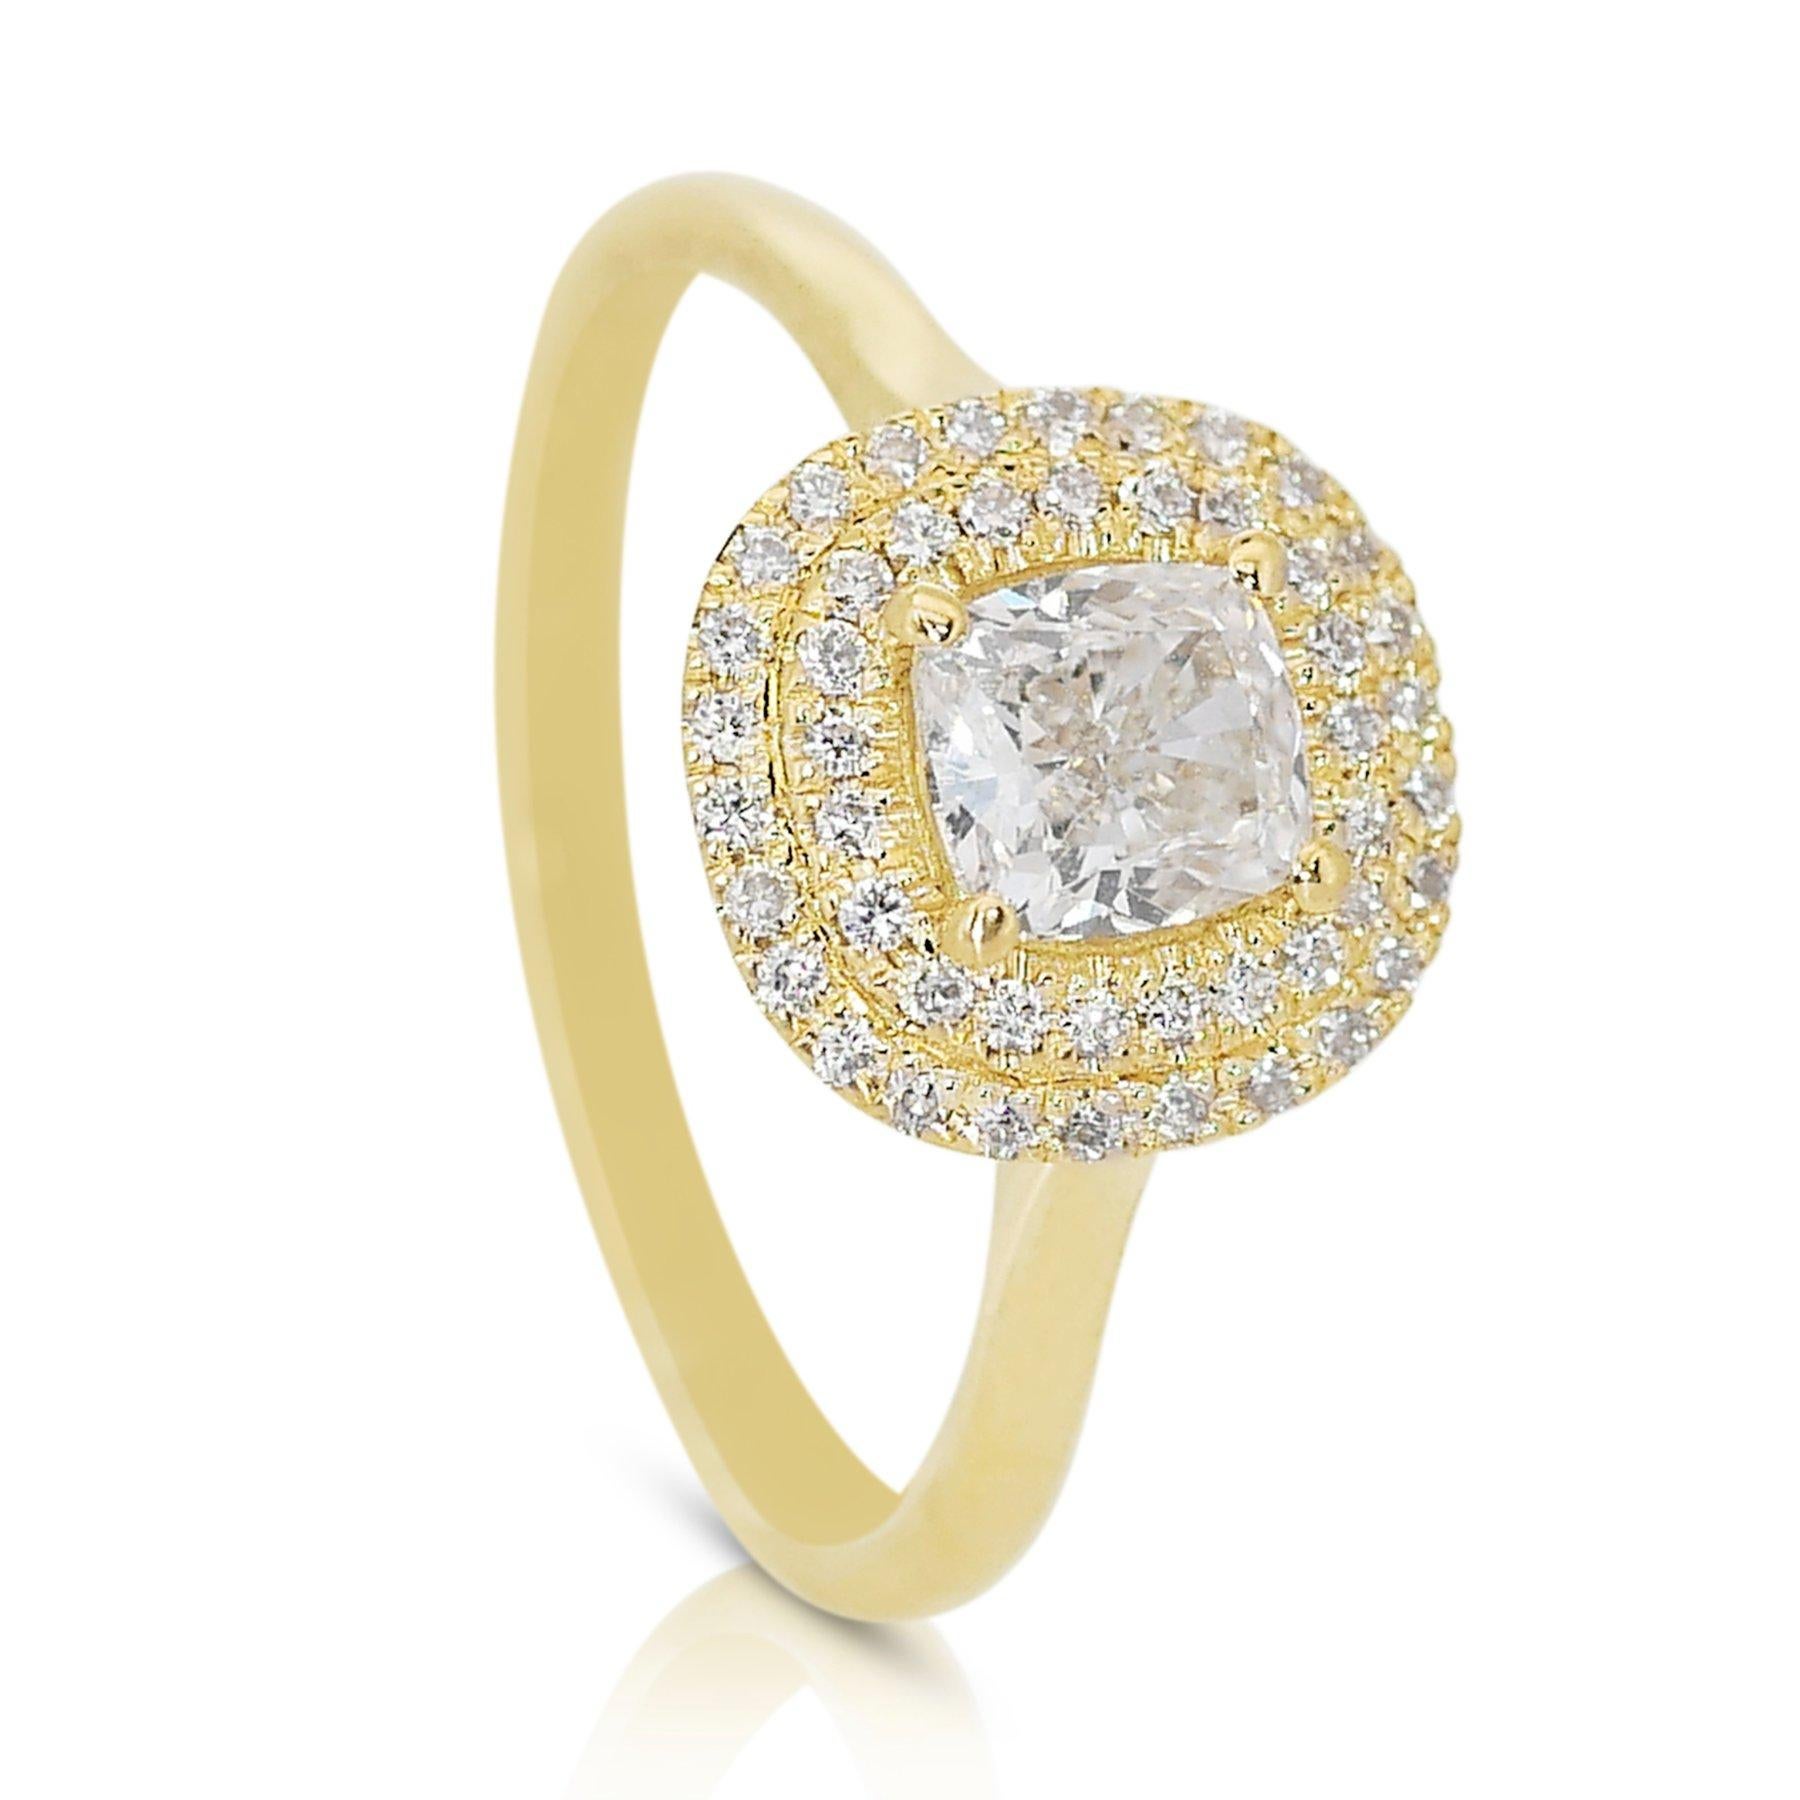 Magnificent 1.22ct Diamond Double Halo Ring in 18k Yellow Gold - GIA Certified

Indulge in timeless elegance with this exquisite 18k yellow gold diamond double halo ring. The centerpiece is a 1.00-carat cushion-shaped diamond. Enhancing the main